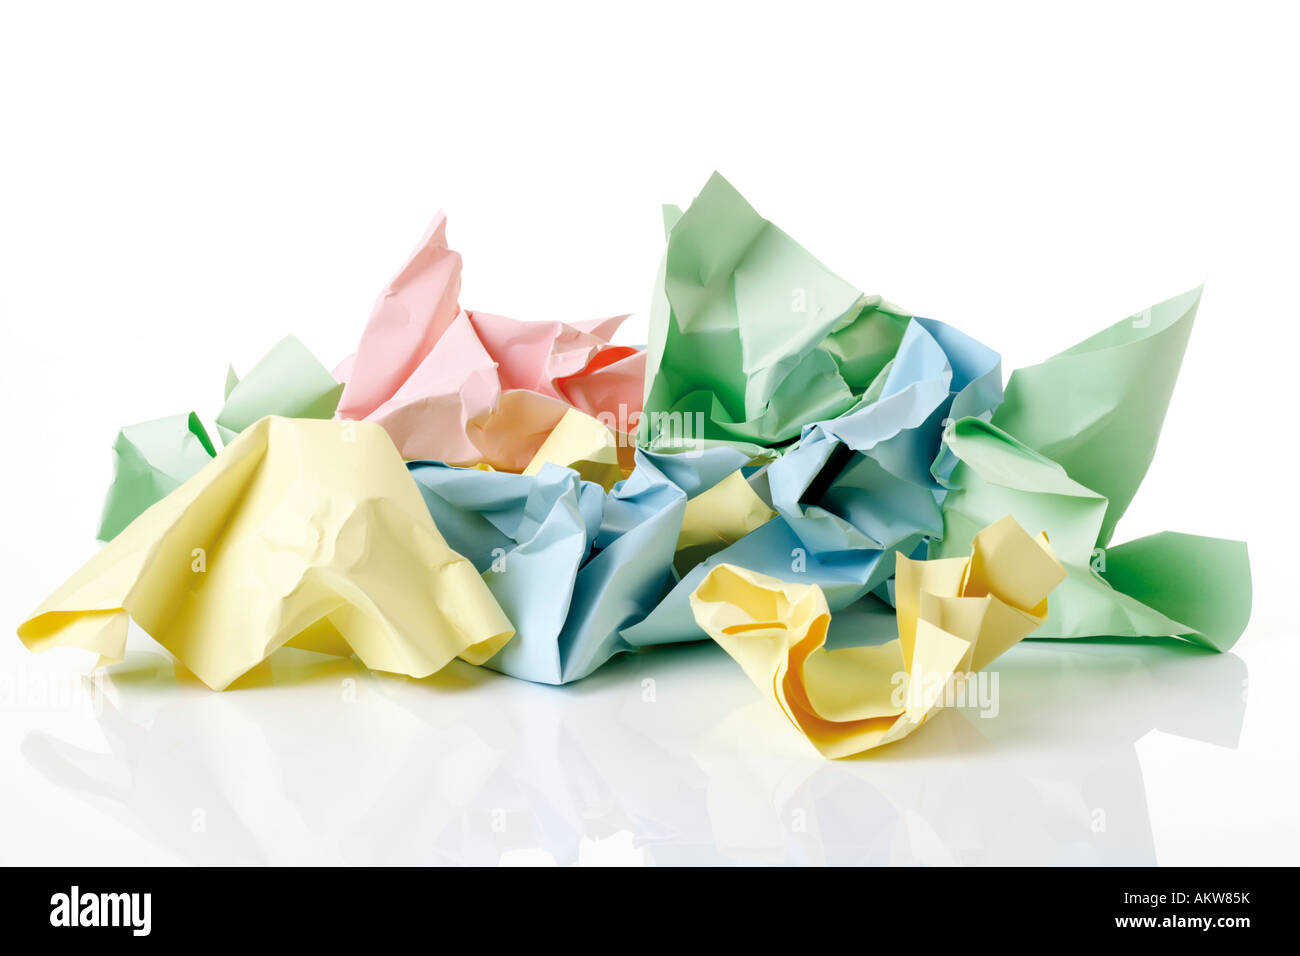 Crumpled paper, close-up Stock Photo